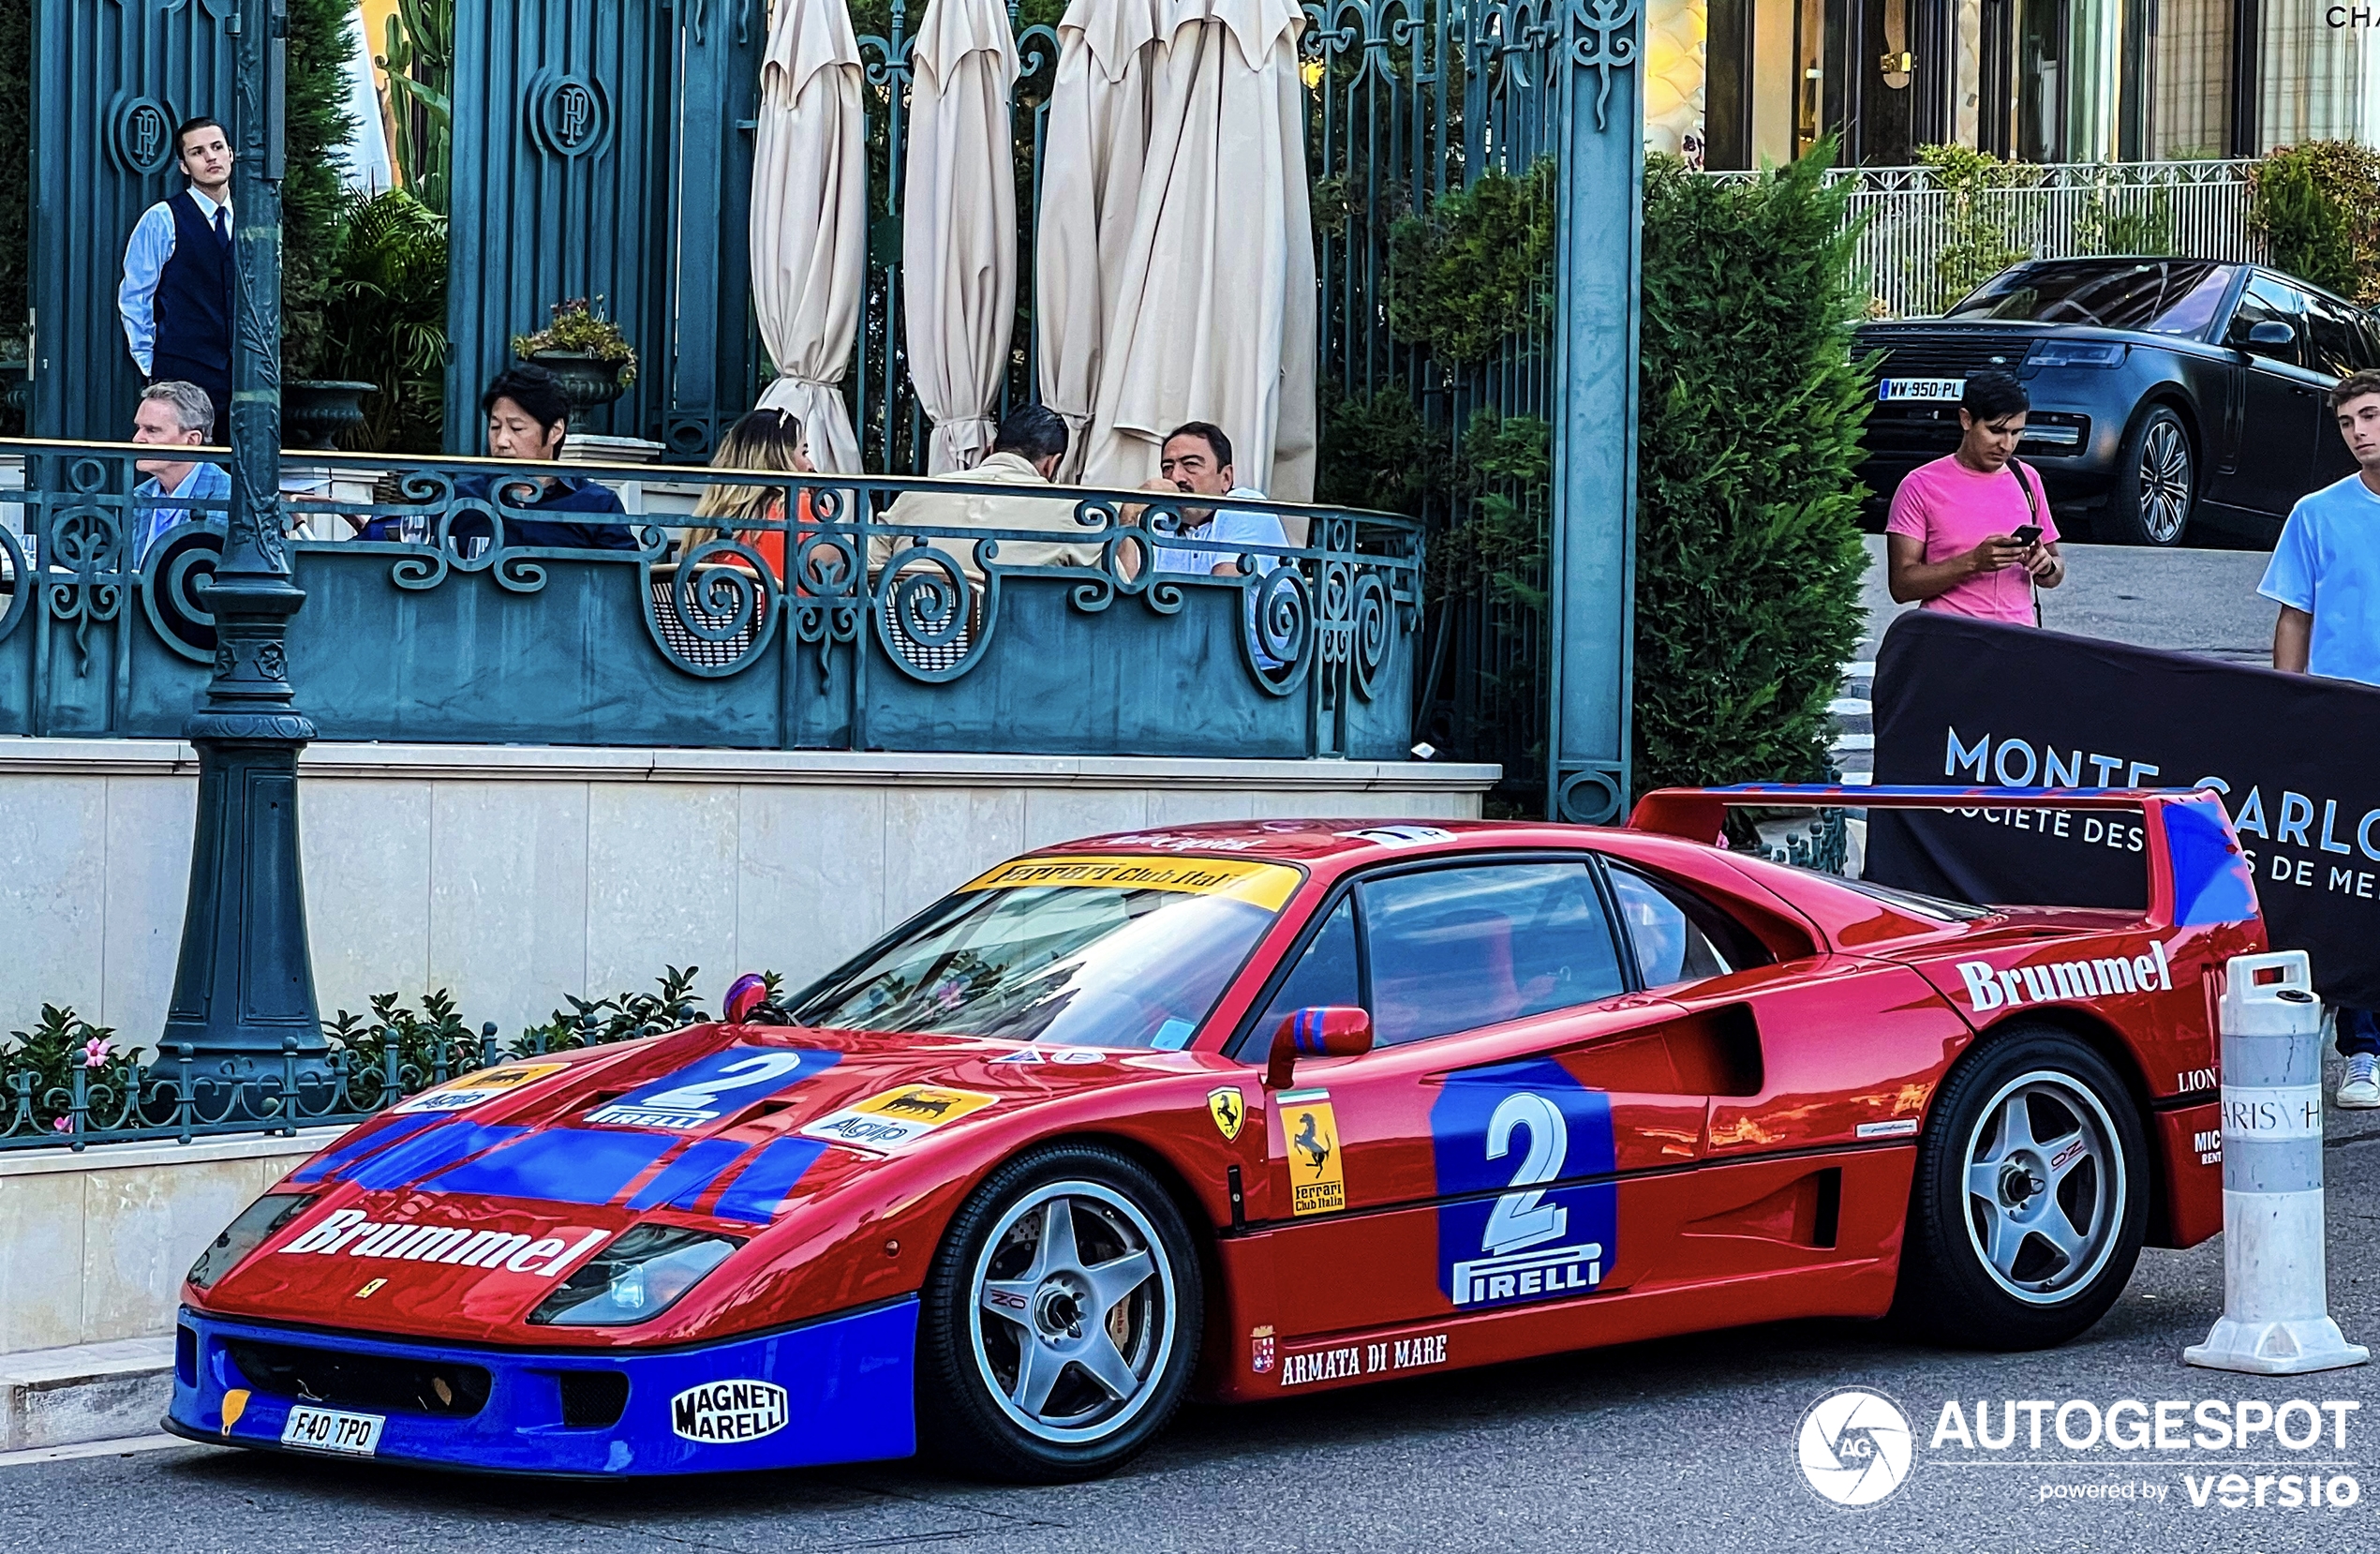 Do you already know the F40 GT?